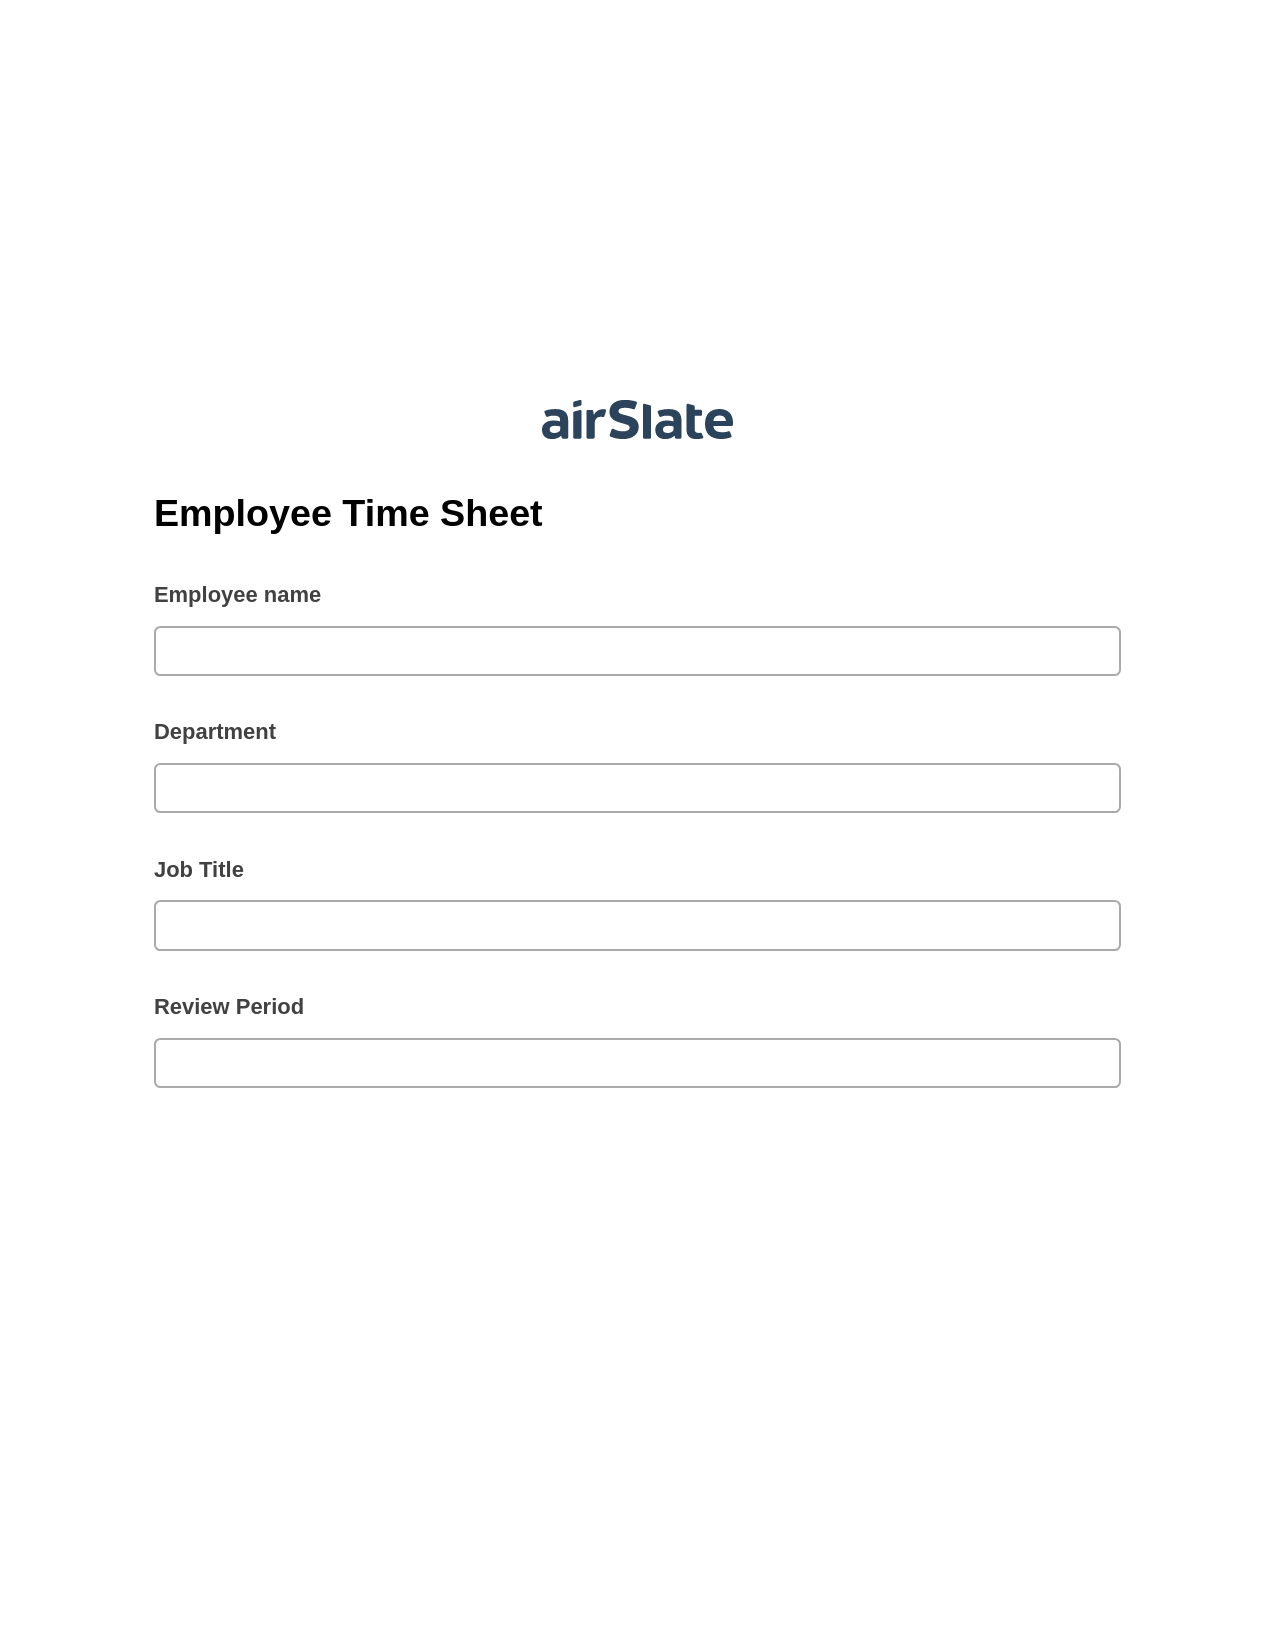 Employee Time Sheet Pre-fill from another Slate Bot, Create slate addon, Export to Excel 365 Bot